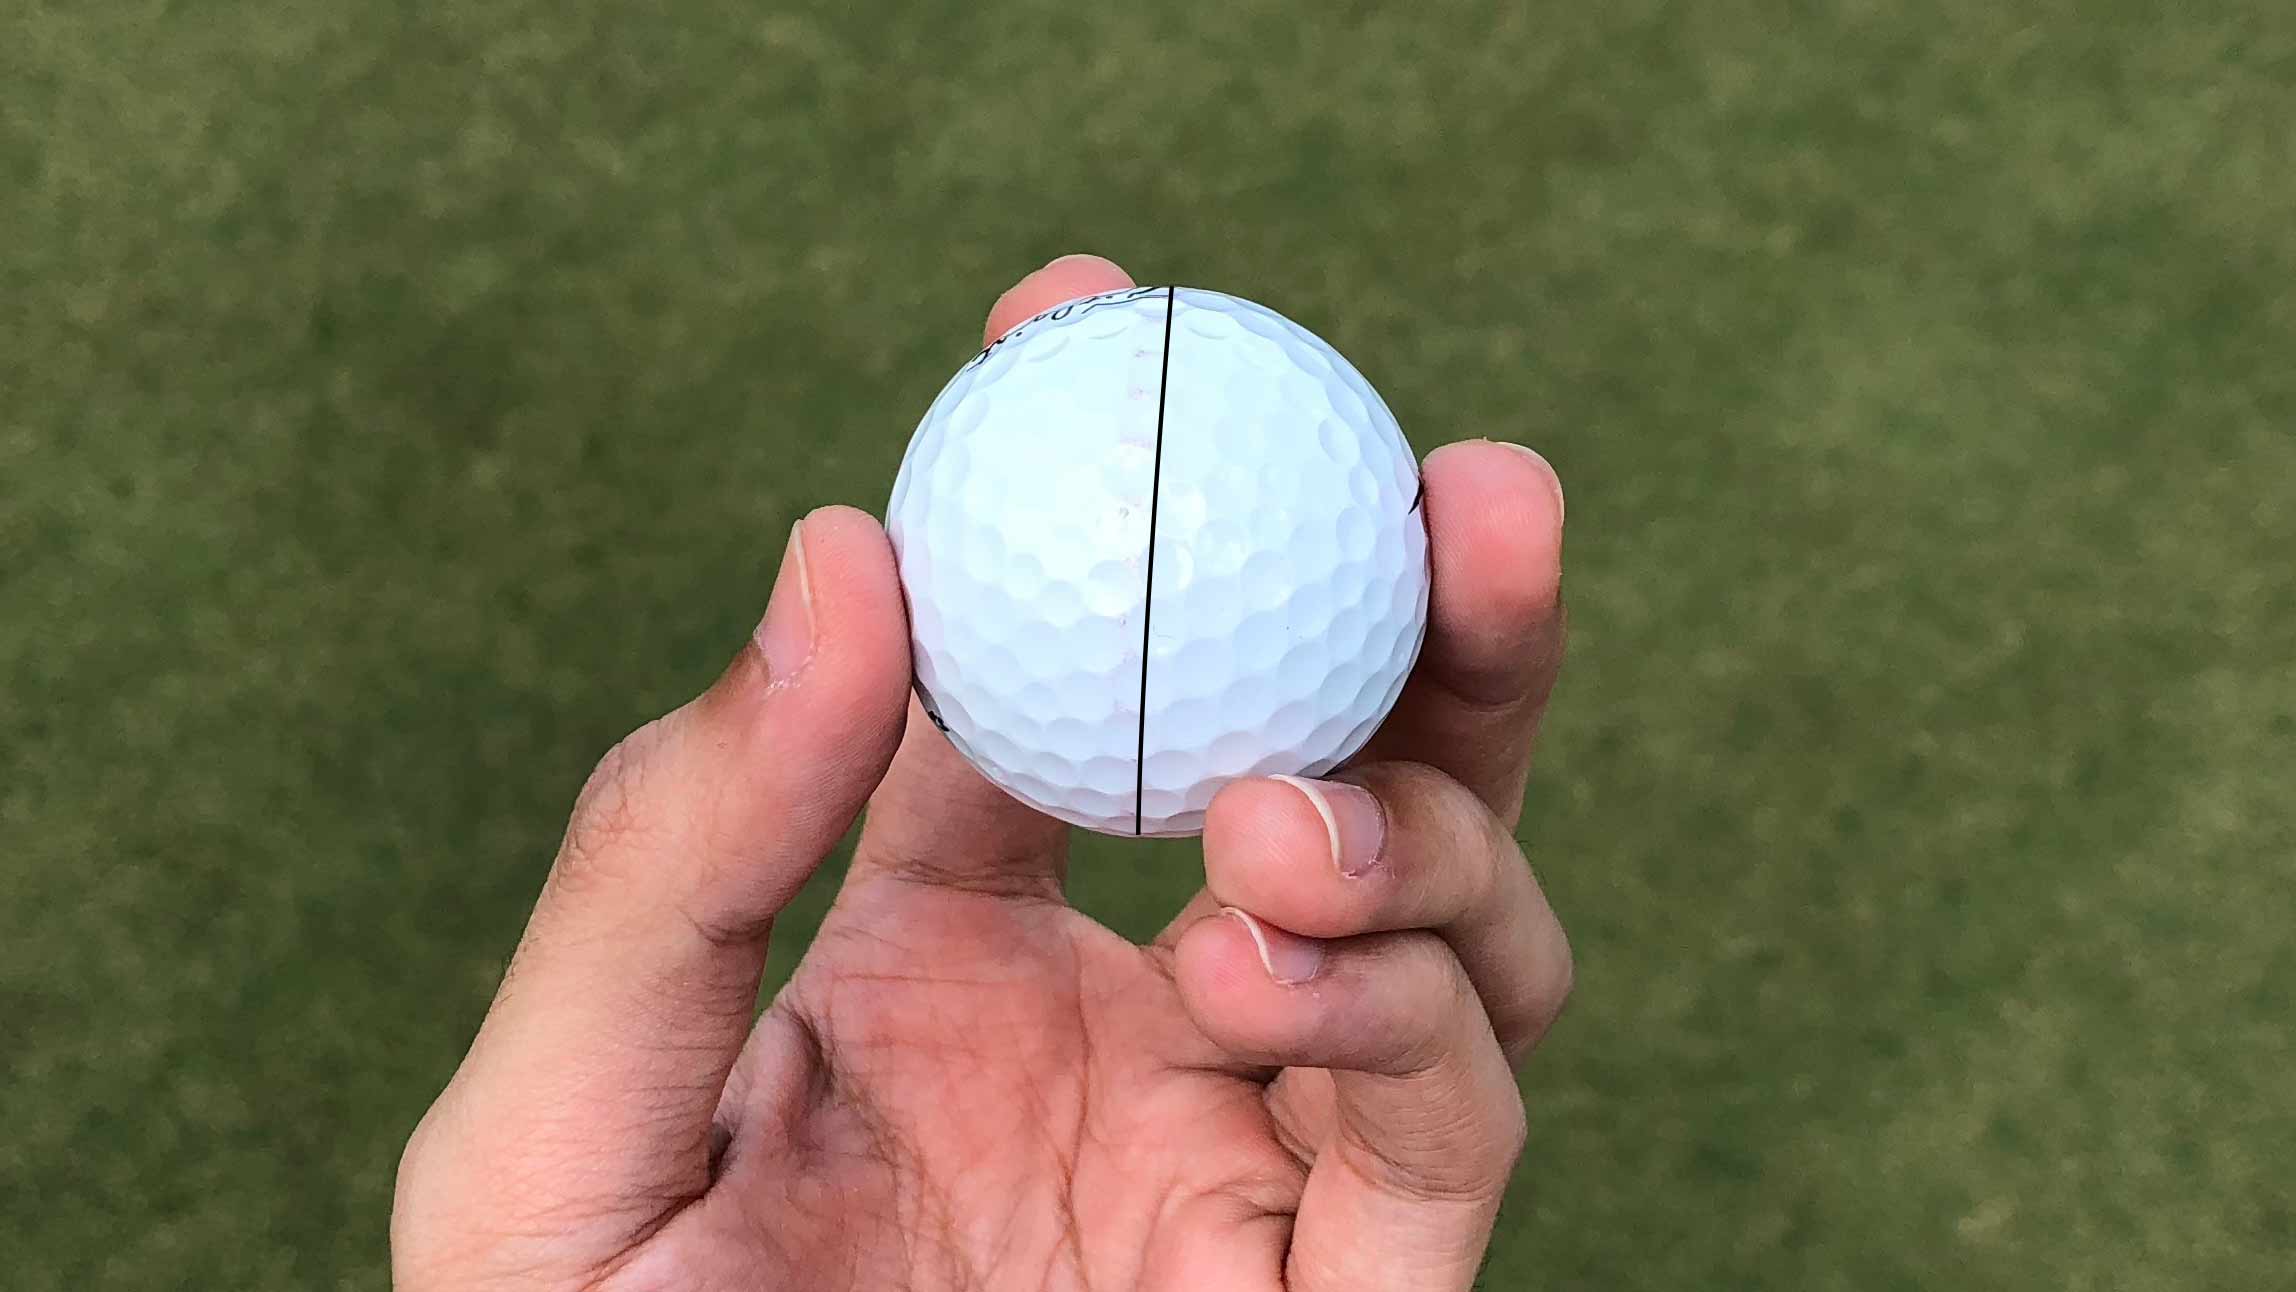 Why marking your golf ball with an alignment line should be prohibited